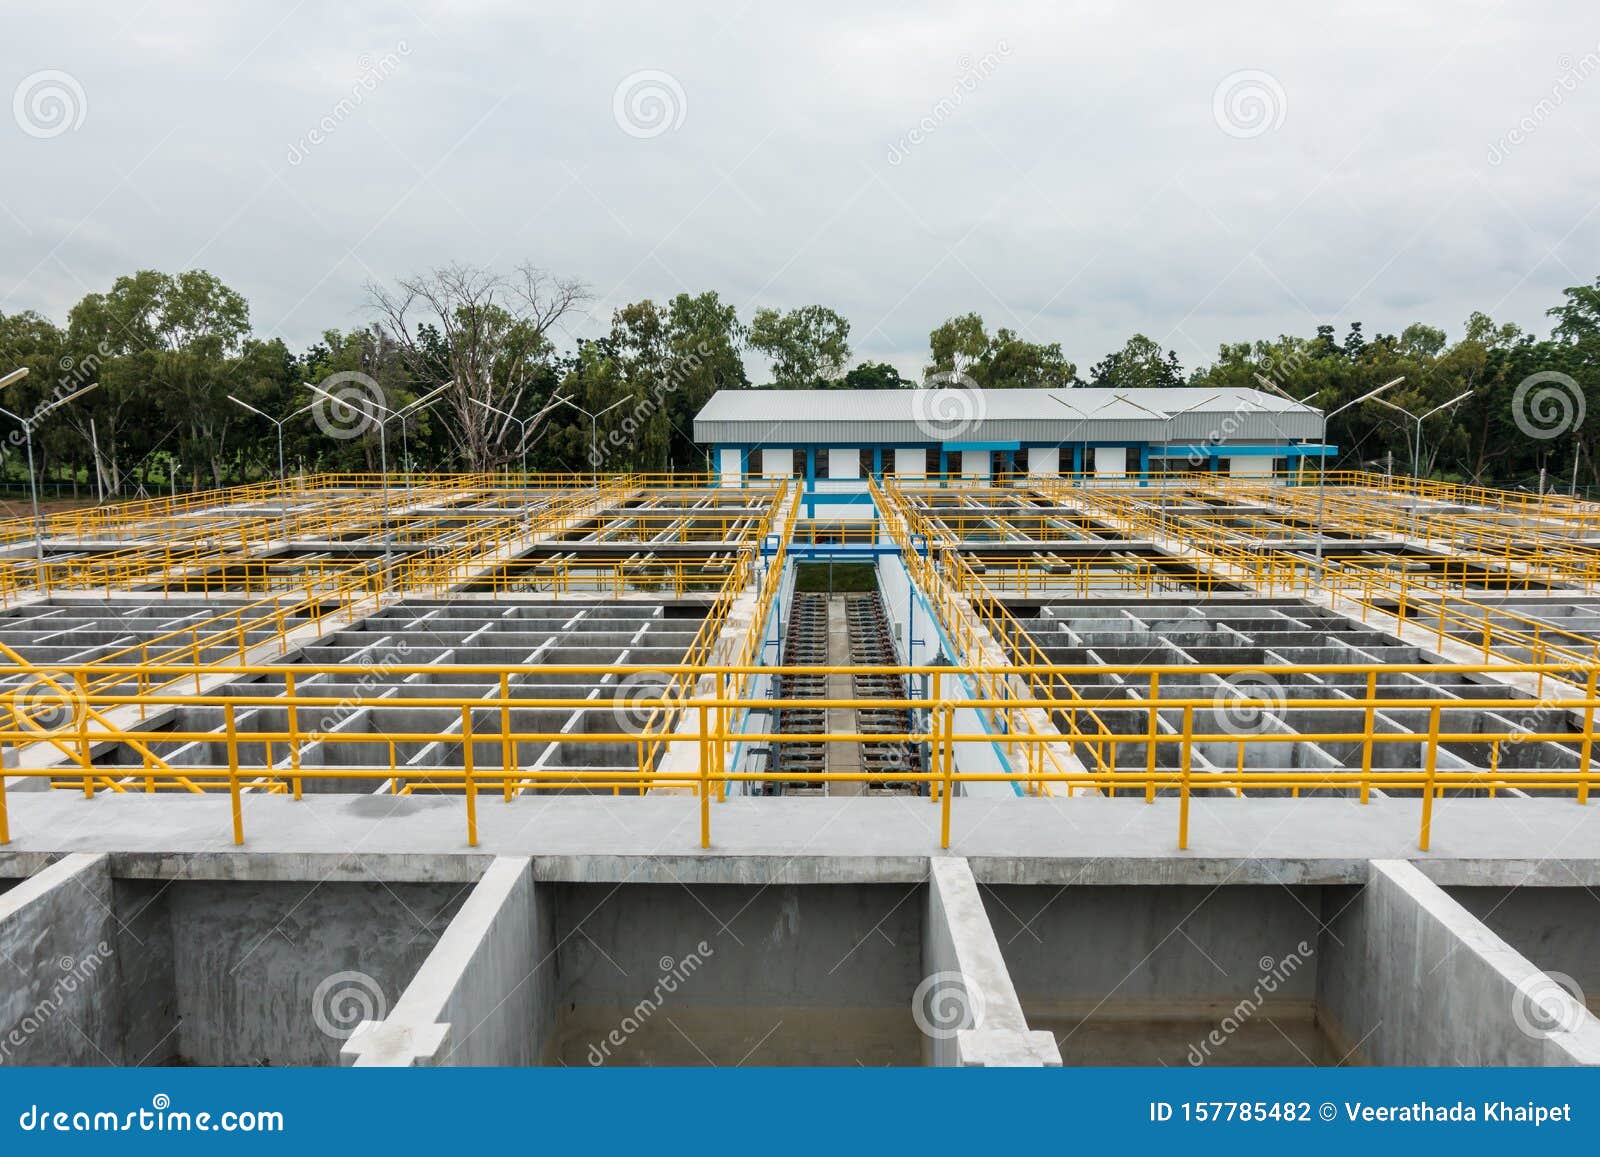 slow mixing flocculation and sedimentation tank in conventional water treatment plant